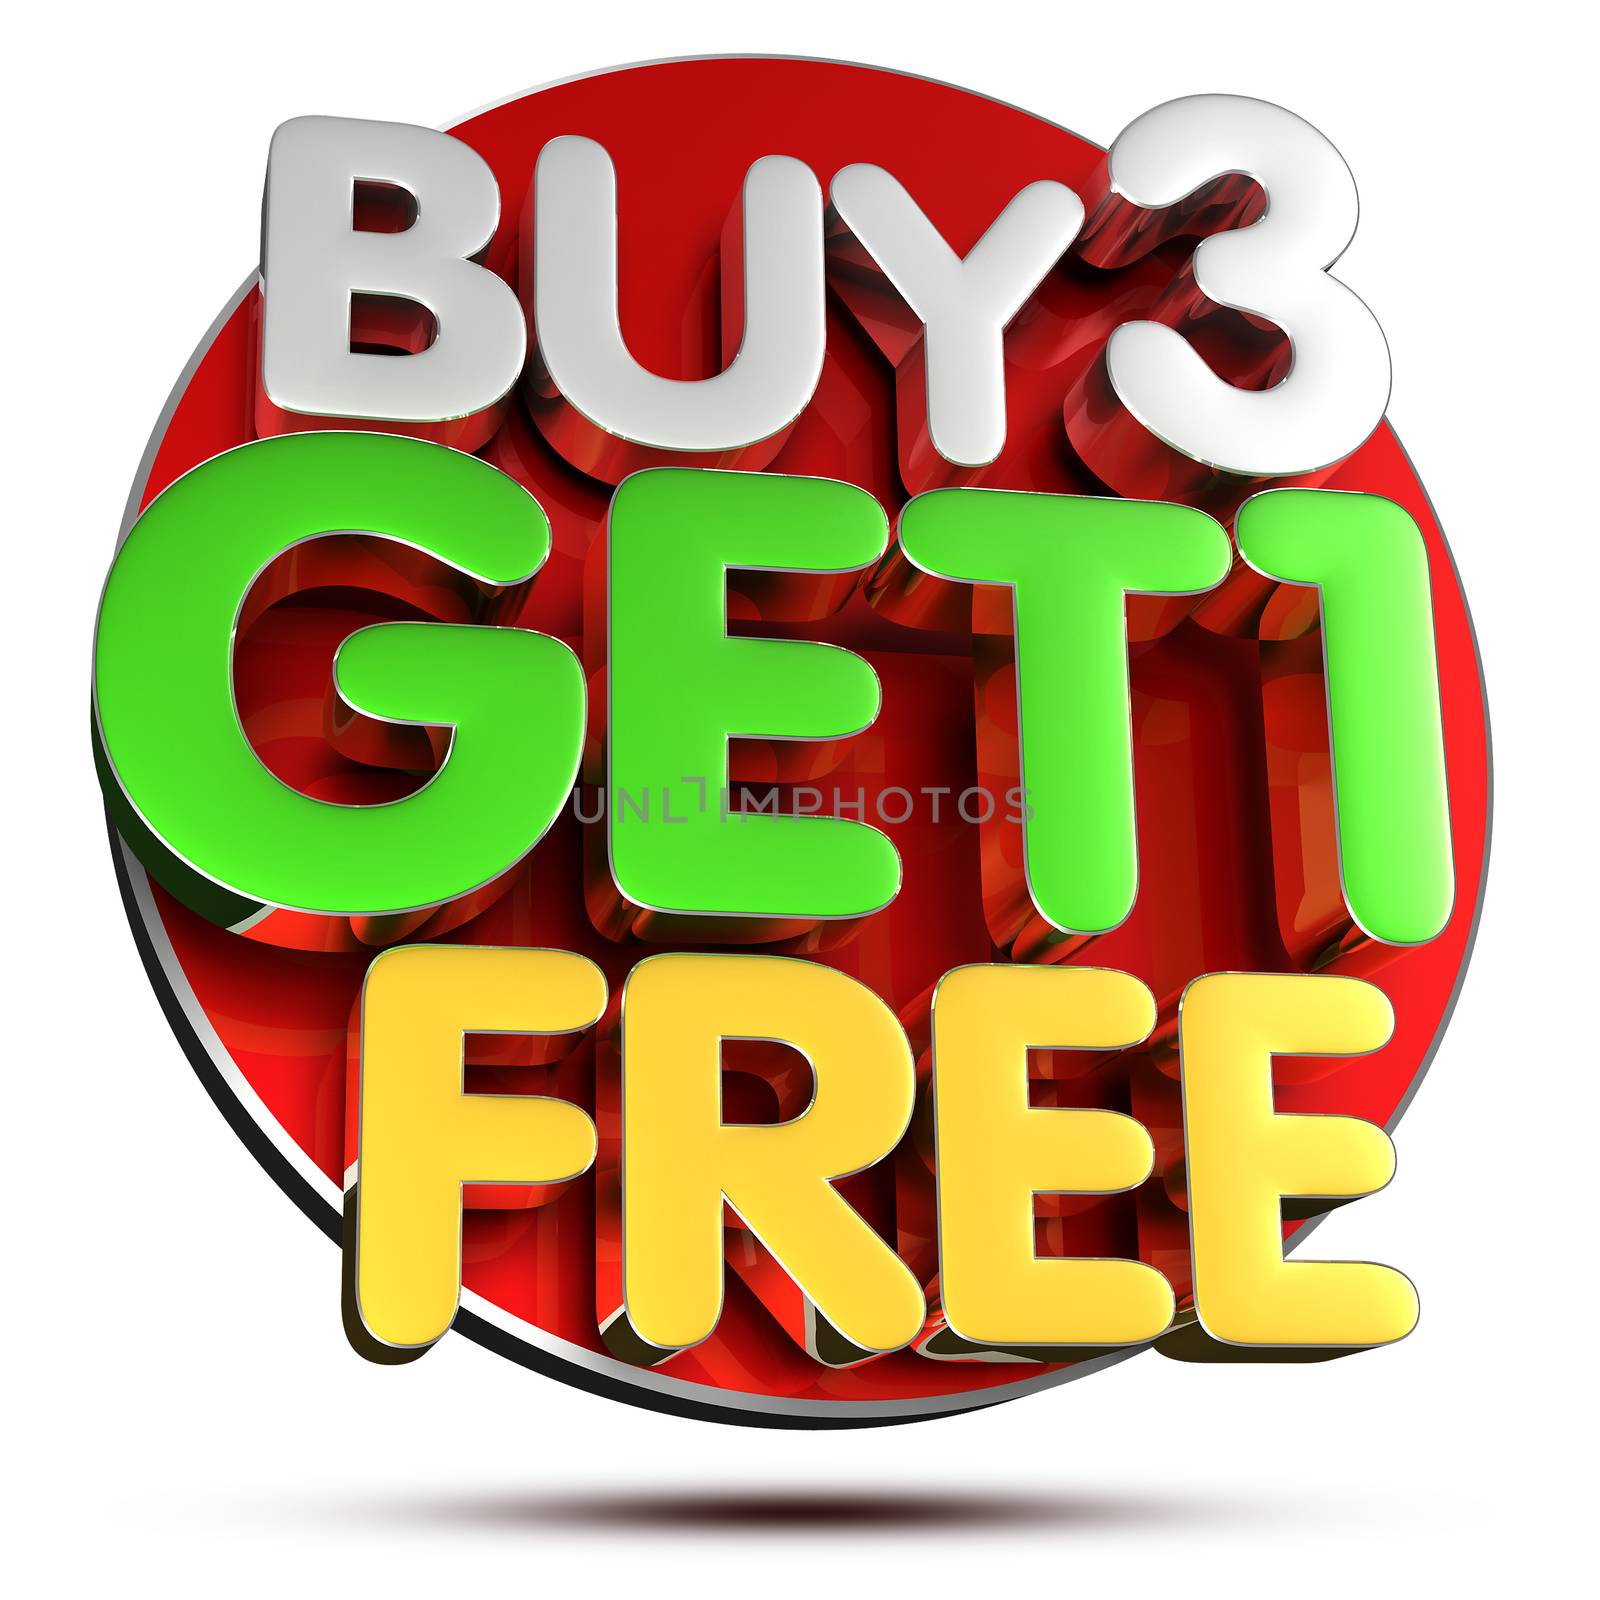 Buy 3 Get 1 Free 3D. by thitimontoyai